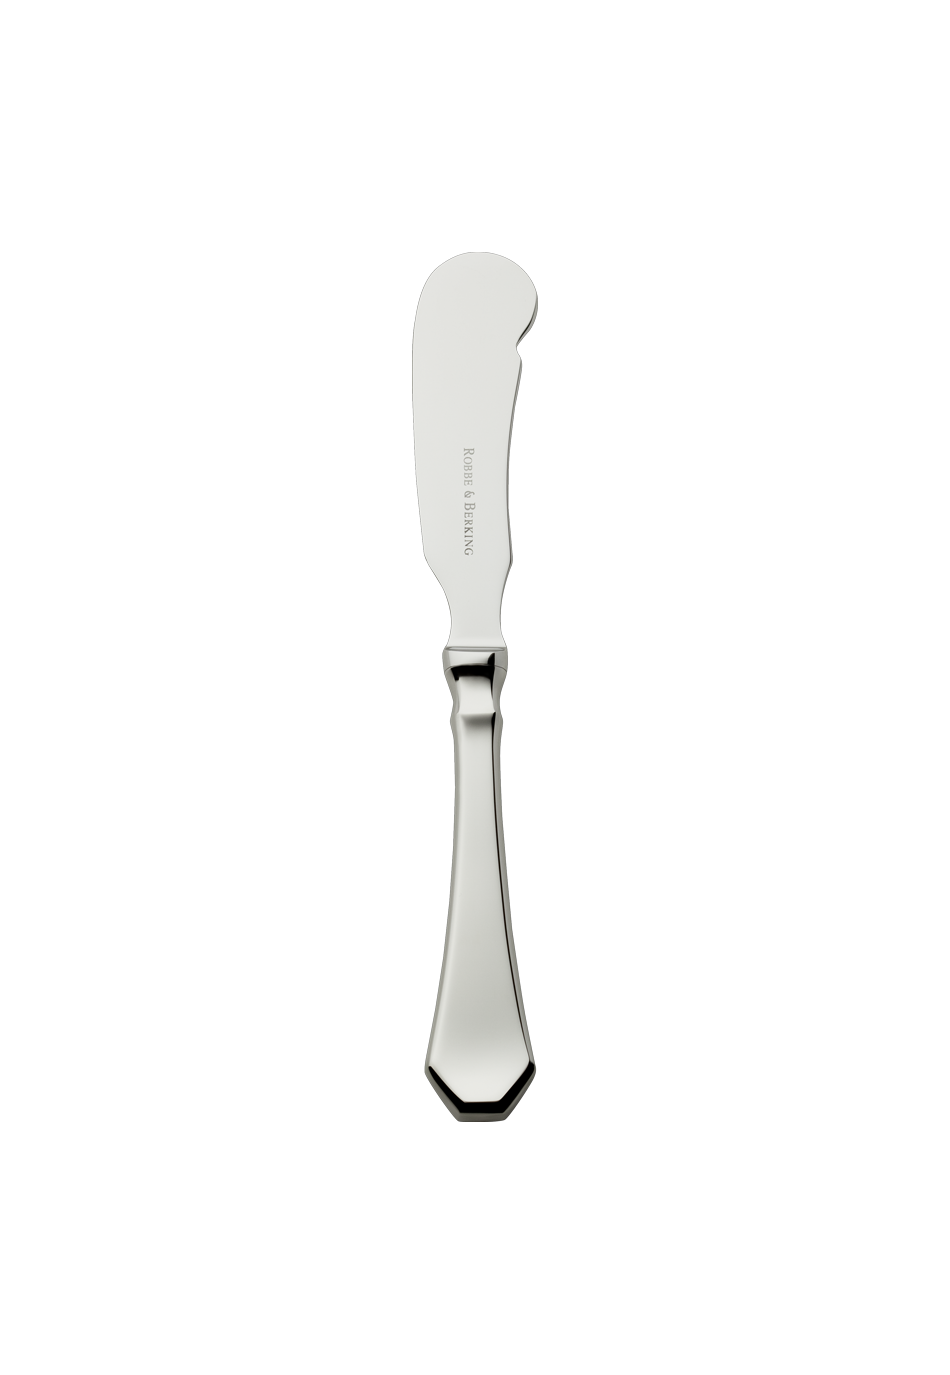 Baltic Butter Knife (18/8 stainless steel)